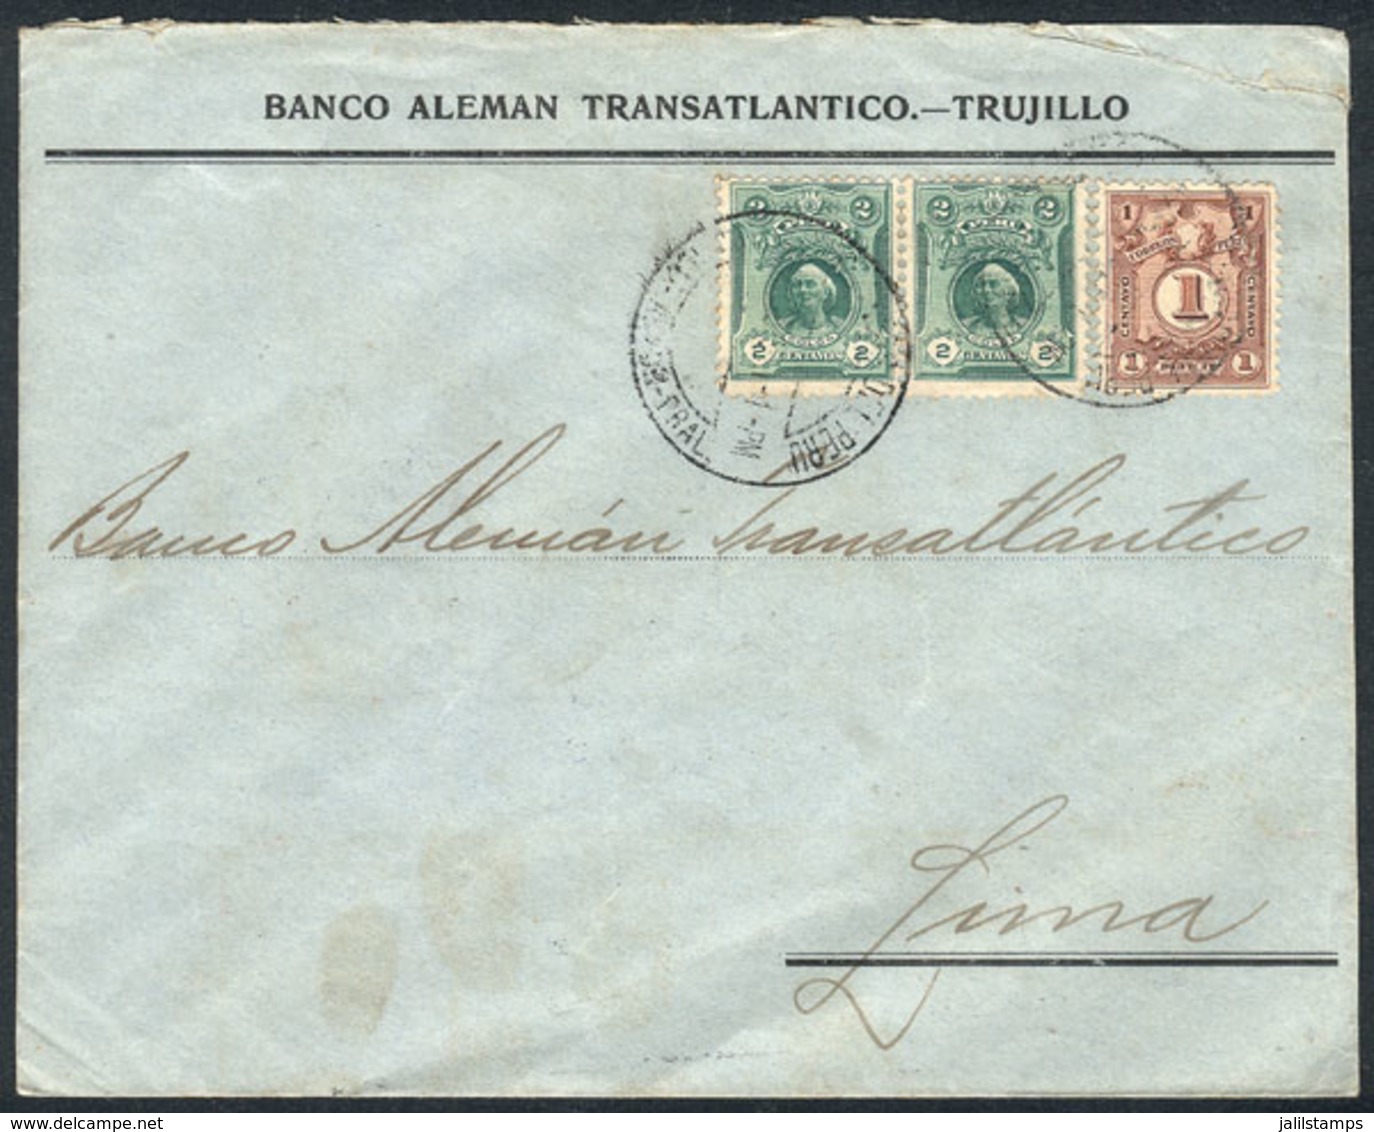 PERU: Cover Franked By Sc.178 Pair + Postage Dues Stamp Sc.J40, Total 5c., Used In Lima, Fine Quality! - Pérou